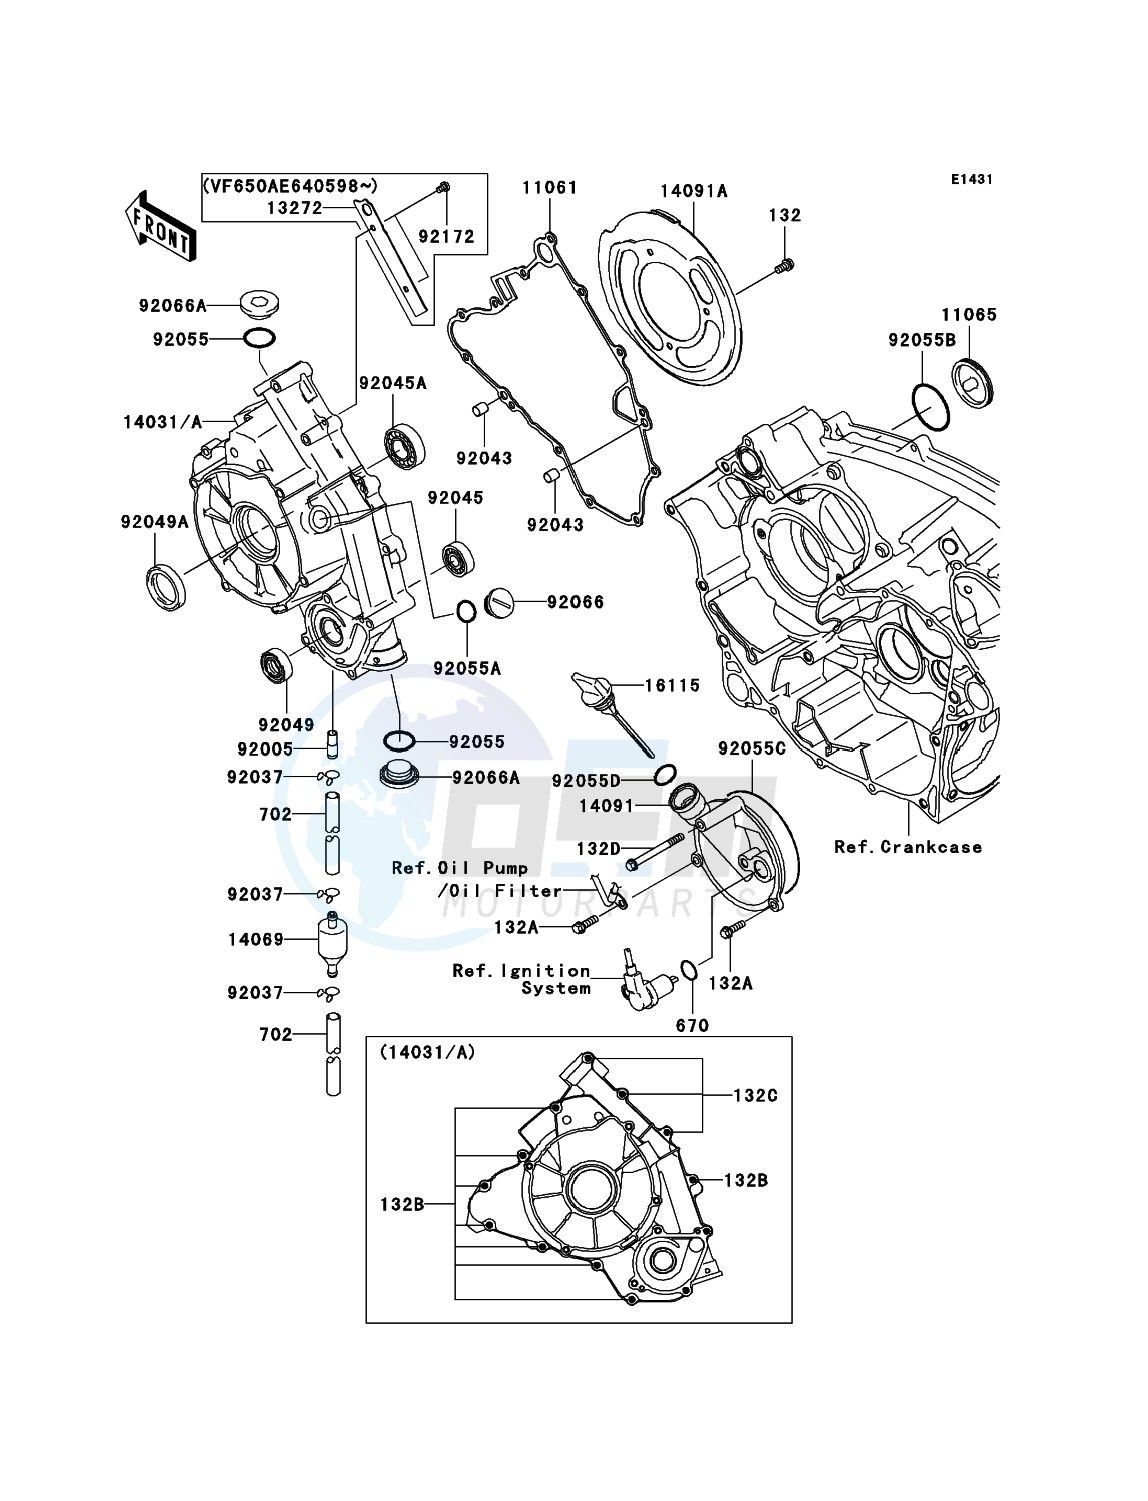 Engine Cover(s) image